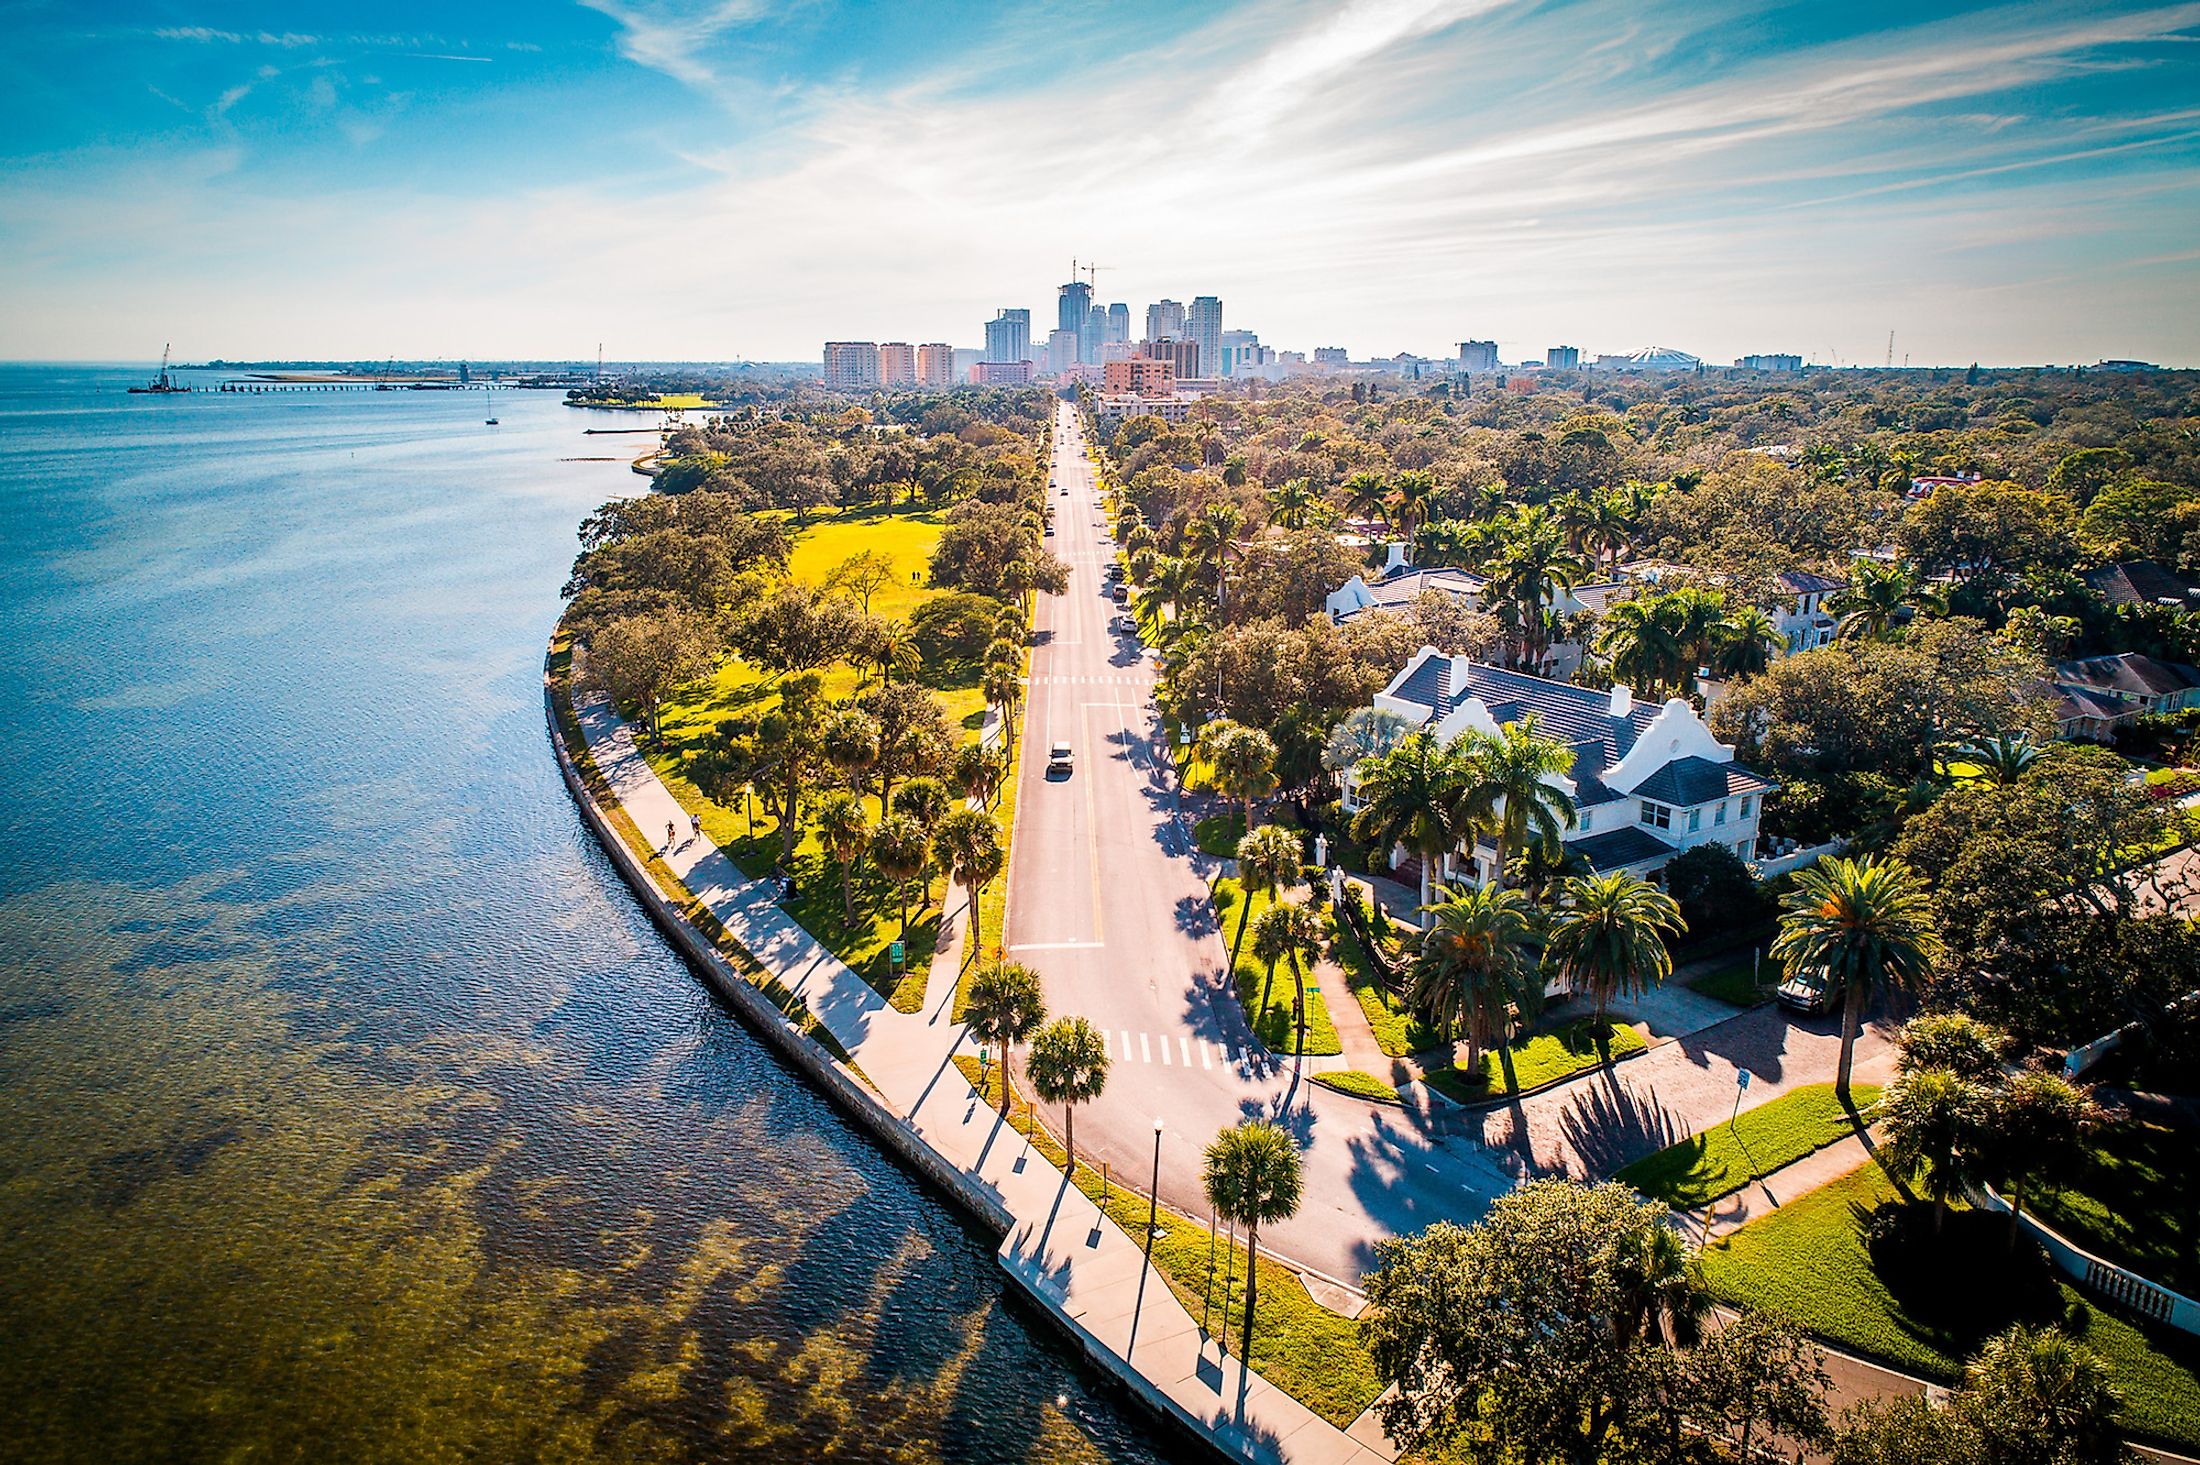 The scenic road where ocean meets city in Downtown Saint Petersburg, Florida.